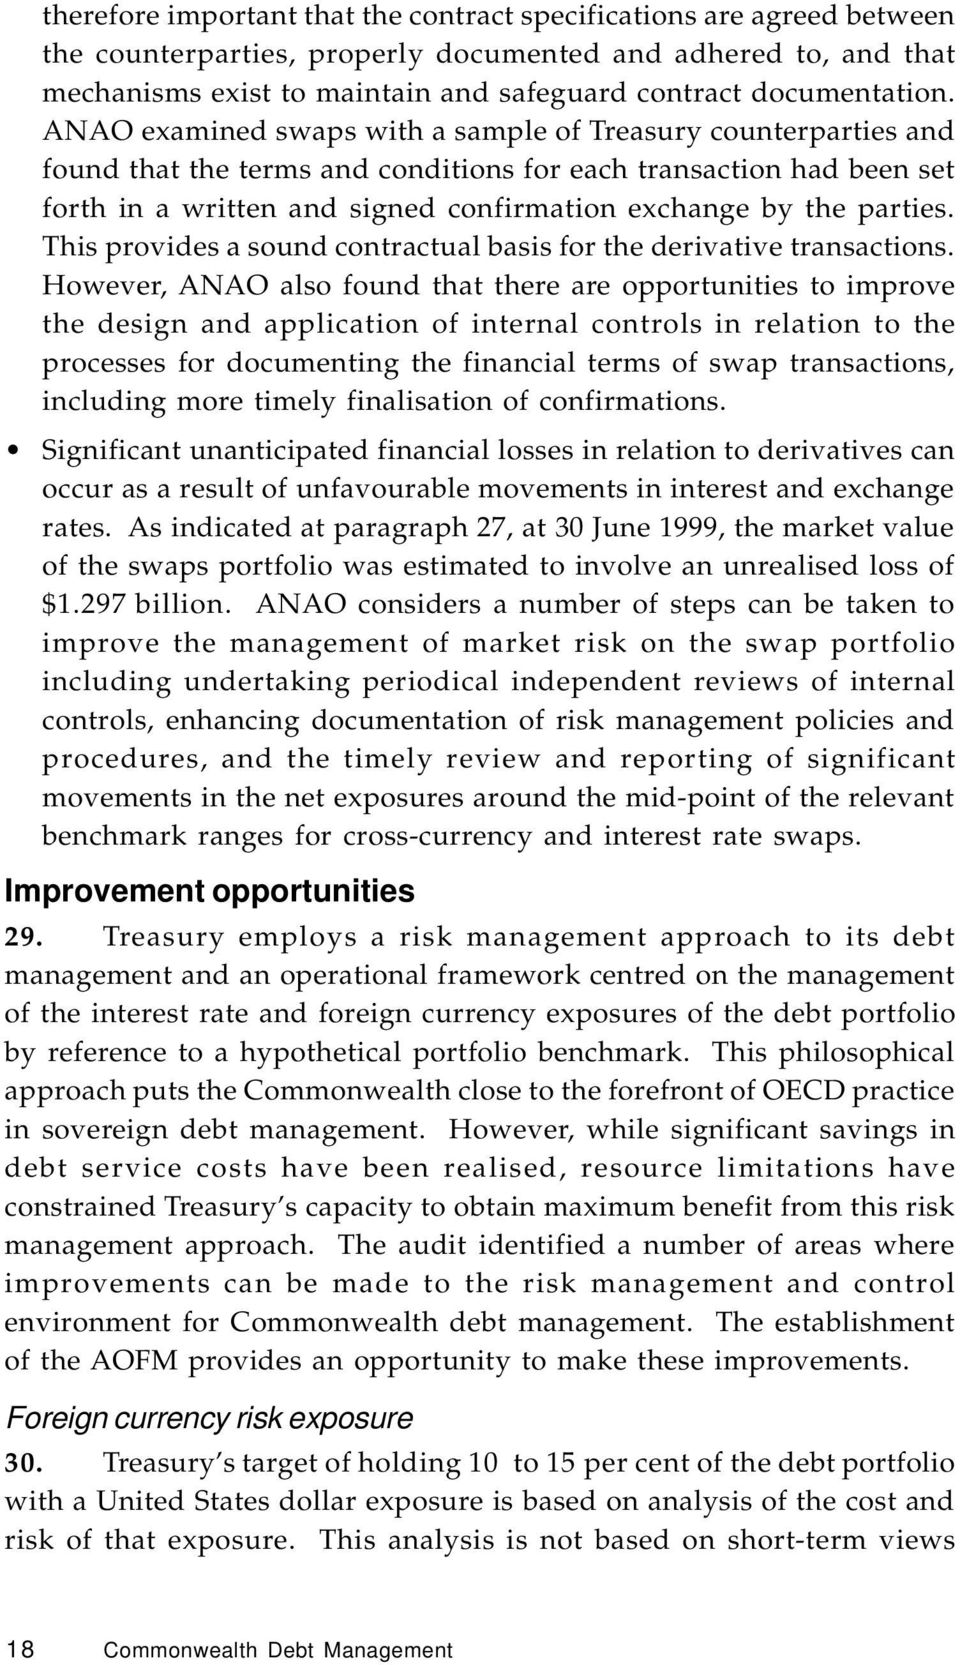 ANAO examined swaps with a sample of Treasury counterparties and found that the terms and conditions for each transaction had been set forth in a written and signed confirmation exchange by the